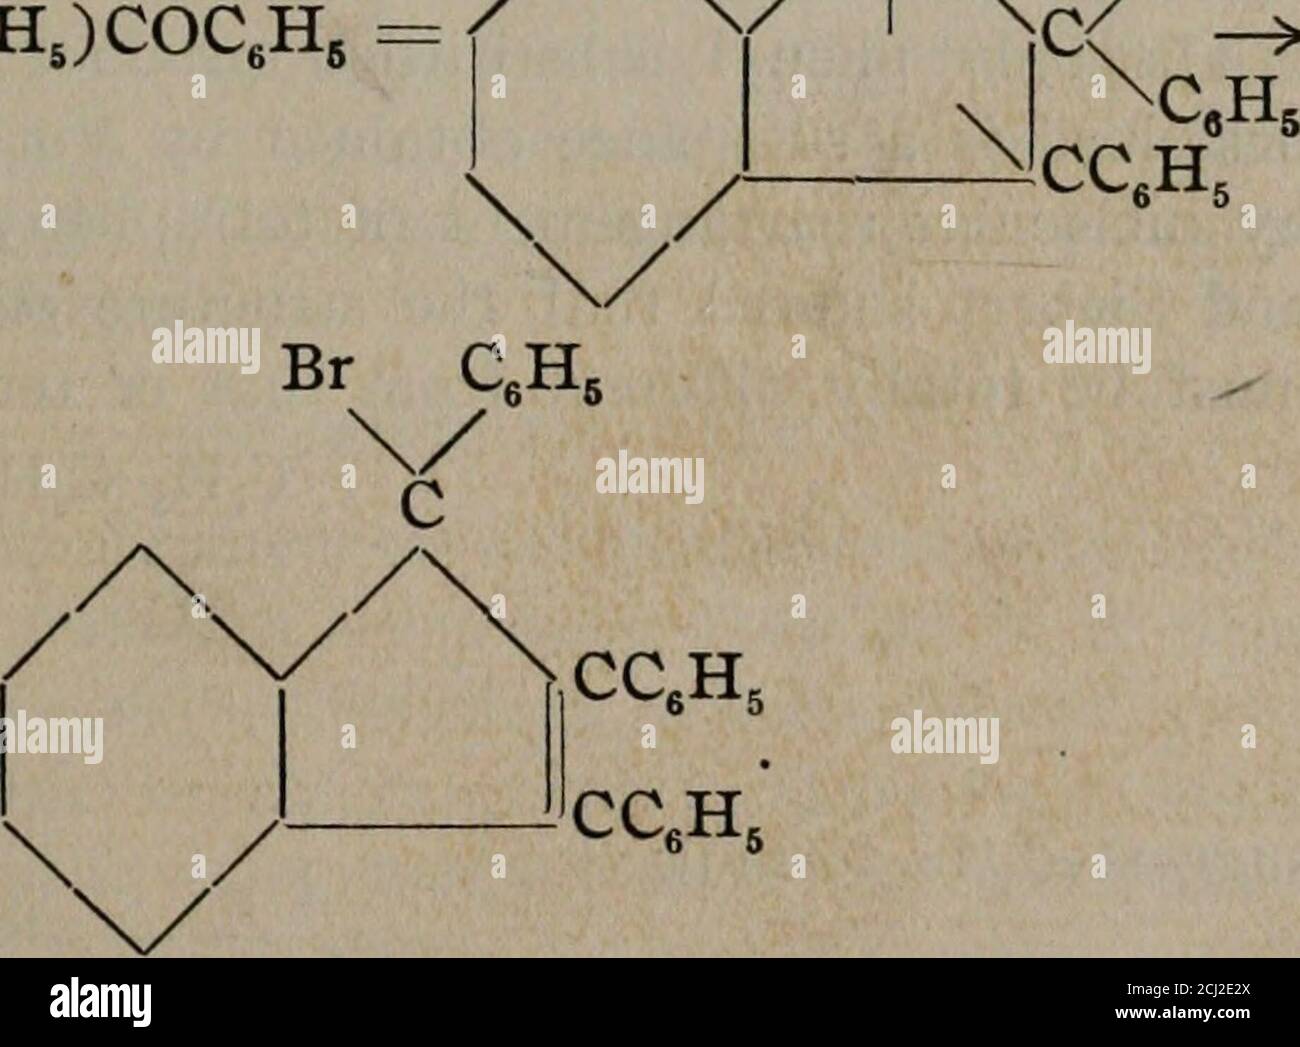 American chemical journal . sh the character of thesecond ring and to  locate the remaining groups it was necessaryto introduce a hydrocarbon  residue in place of bromine orethoxyl. This was accomplished